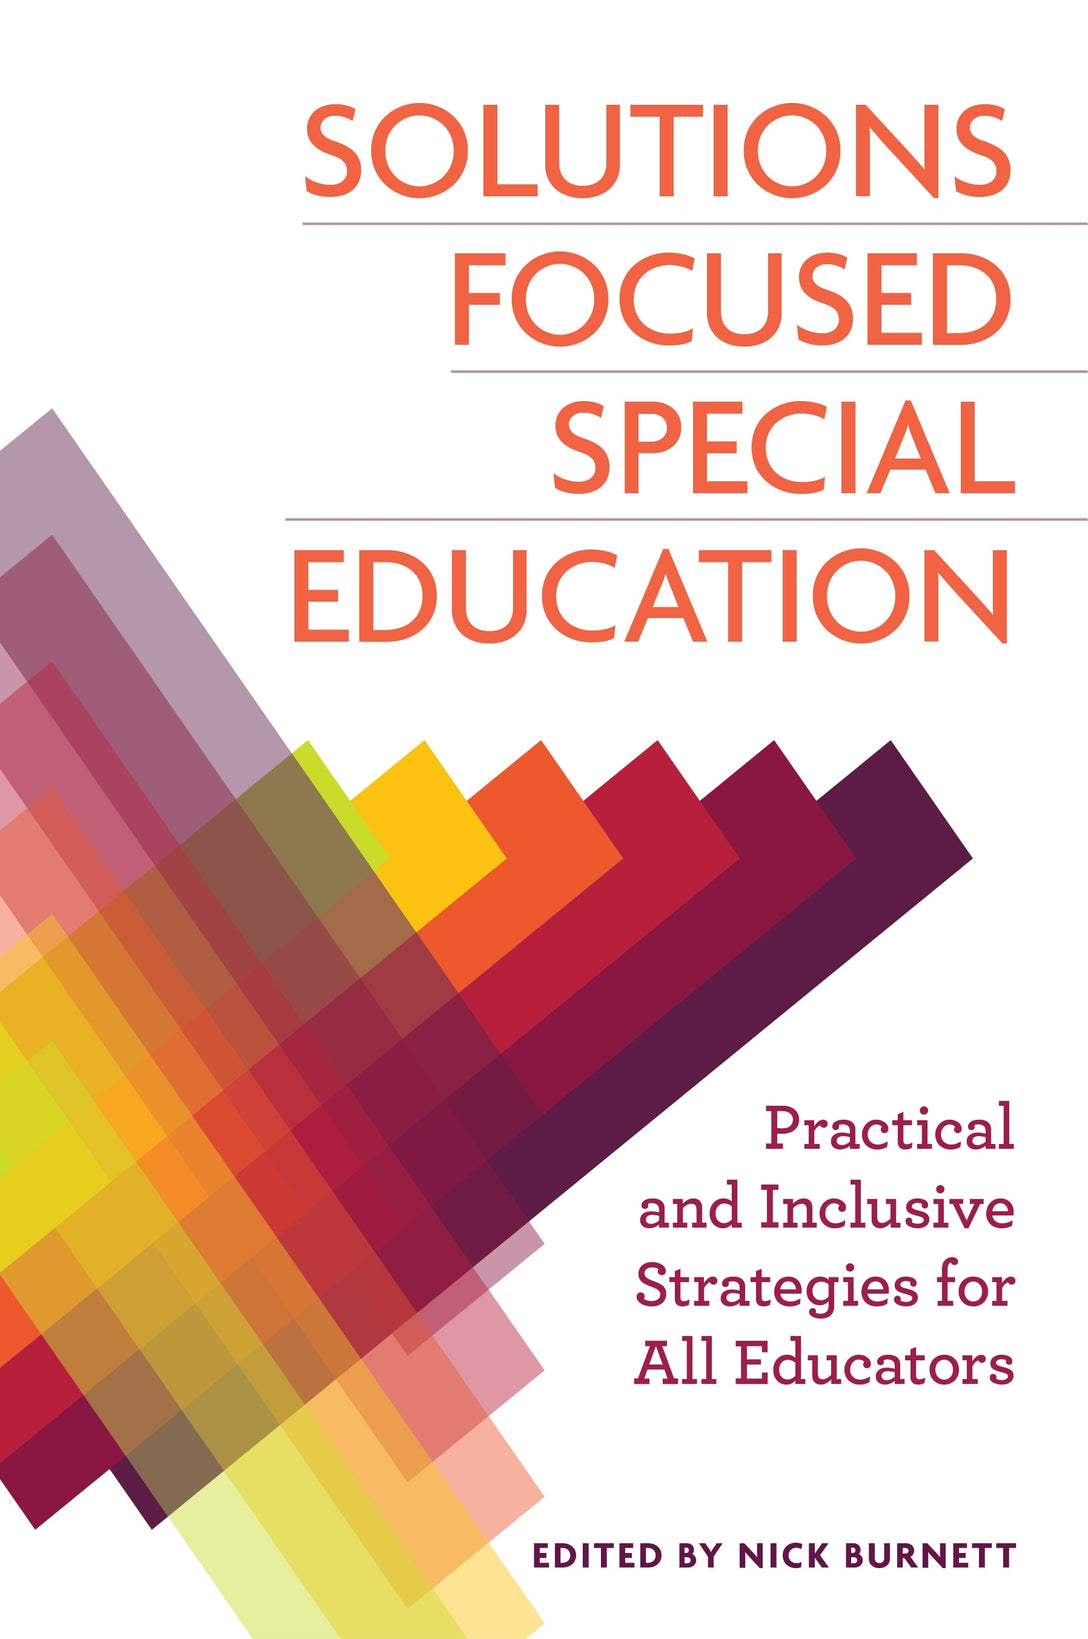 Solutions Focused Special Education by No Author Listed, Nicholas Burnett